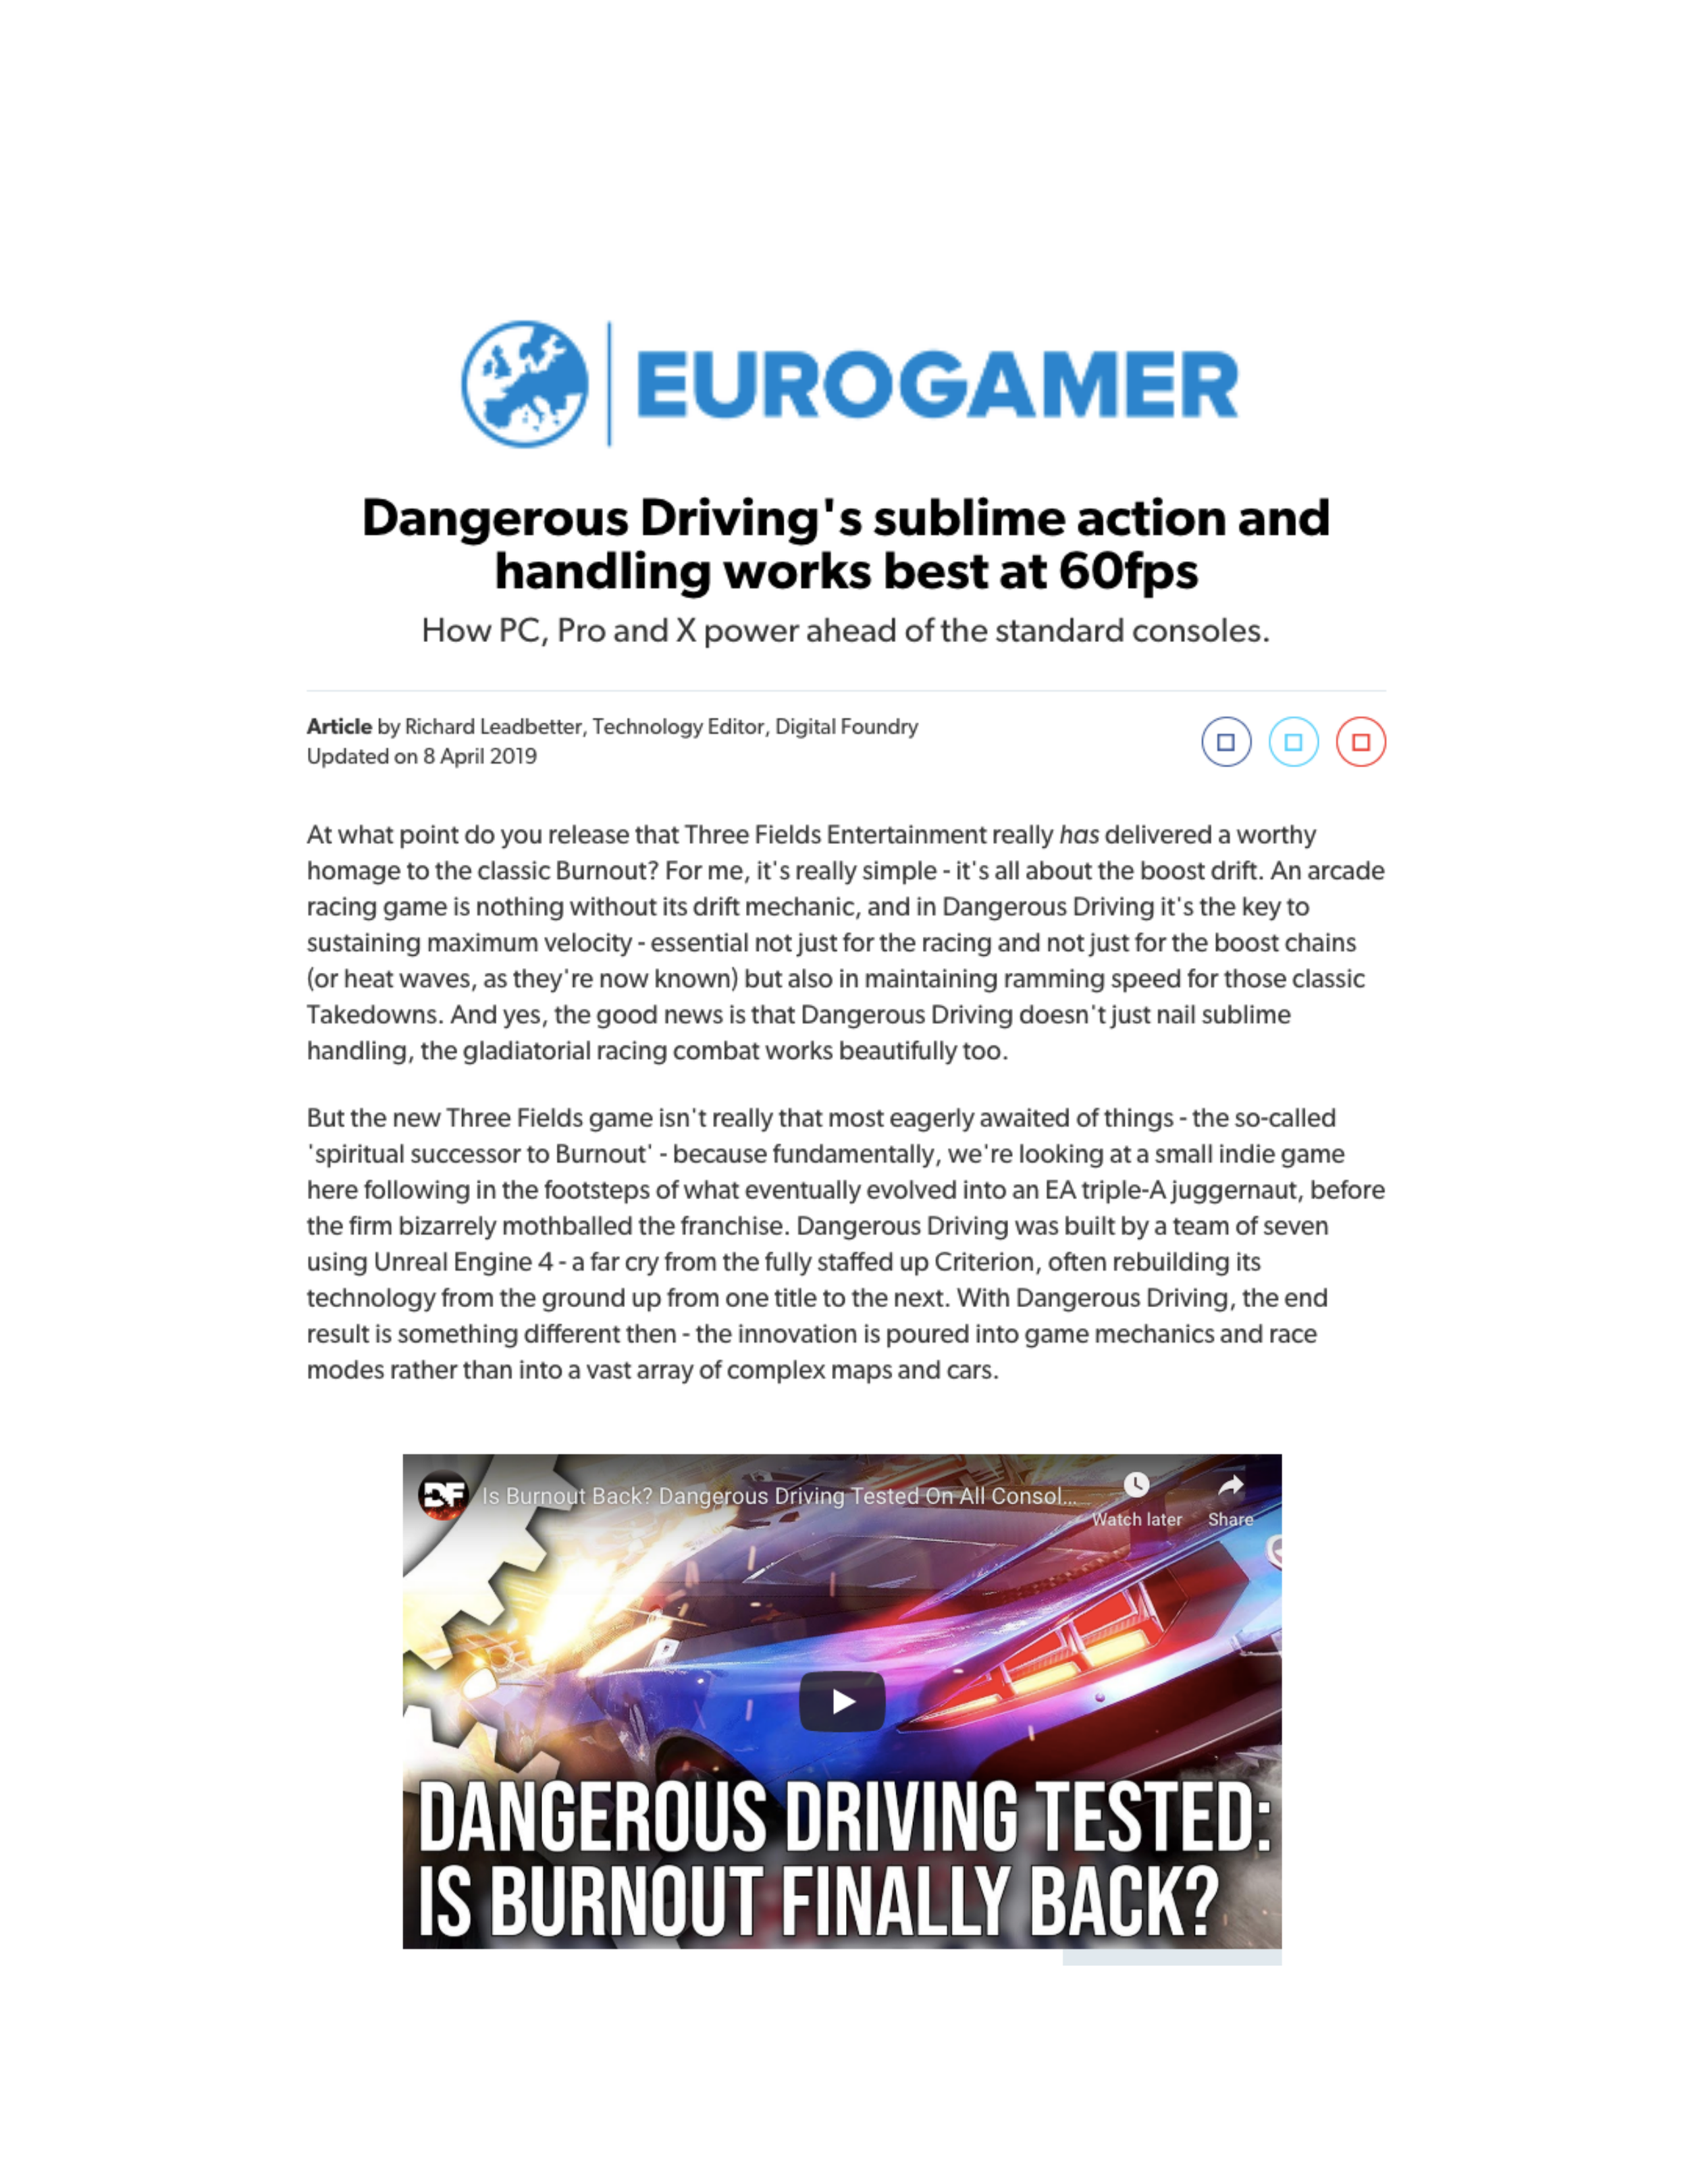 Update: Since publishing their blog, Eurogamer has received a